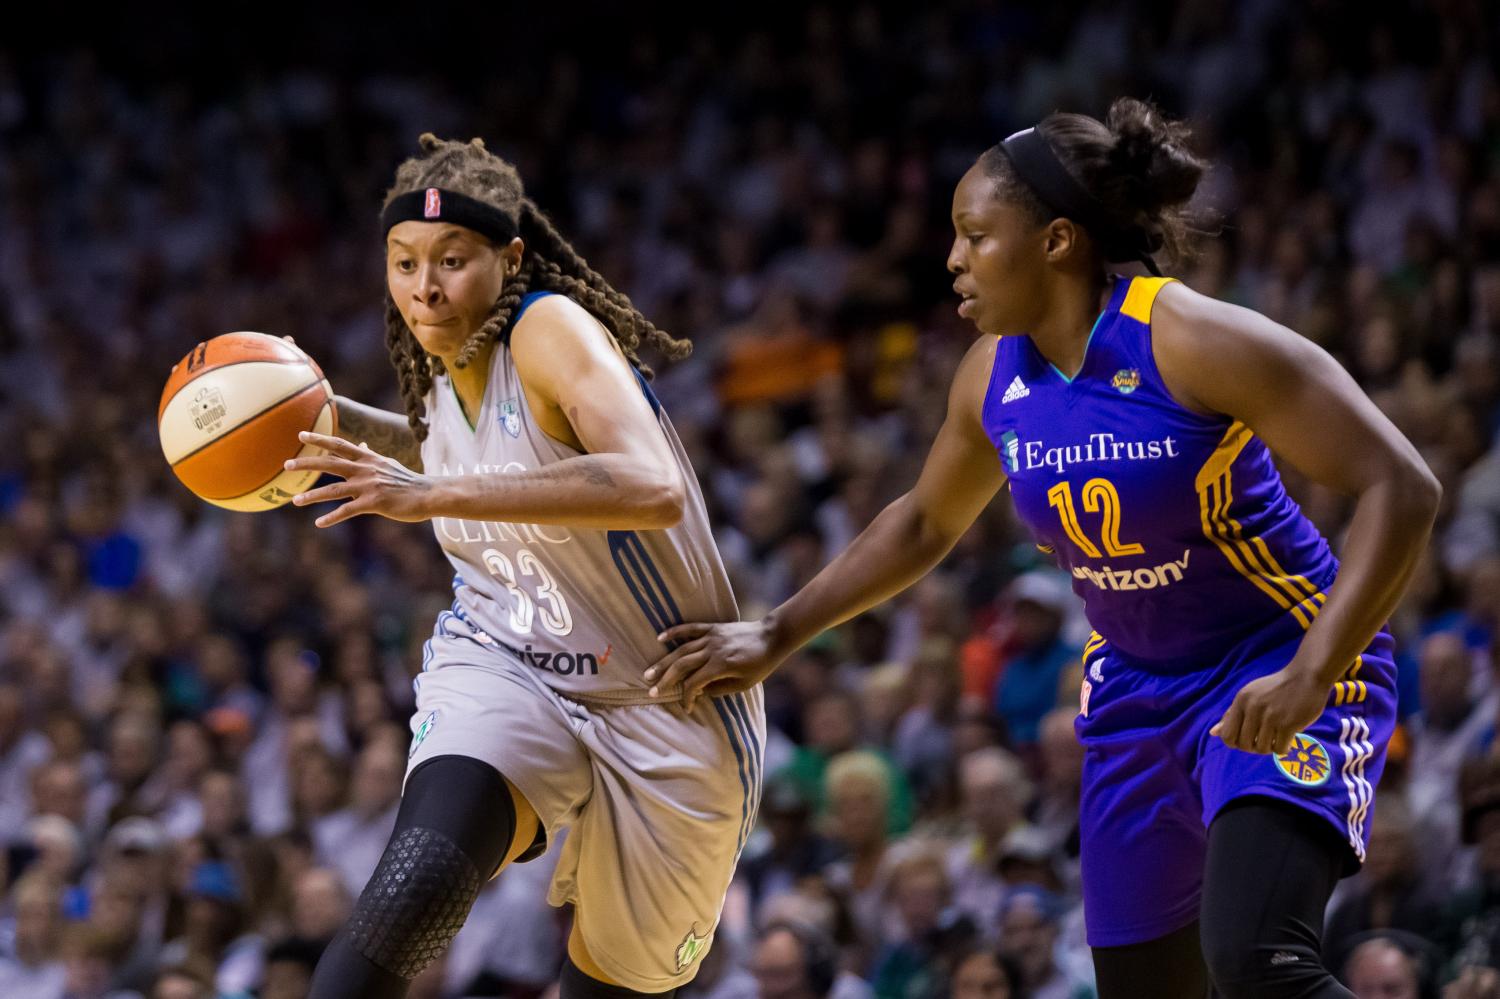 Oct 4, 2017; Minneapolis, MN, USA; Minnesota Lynx guard Seimone Augustus (33) dribbles in the second quarter against the Los Angeles Sparks guard Chelsea Gray (12) in Game 5 of the WNBA Finals at Williams Arena. Mandatory Credit: Brad Rempel-USA TODAY Sports - 10327830